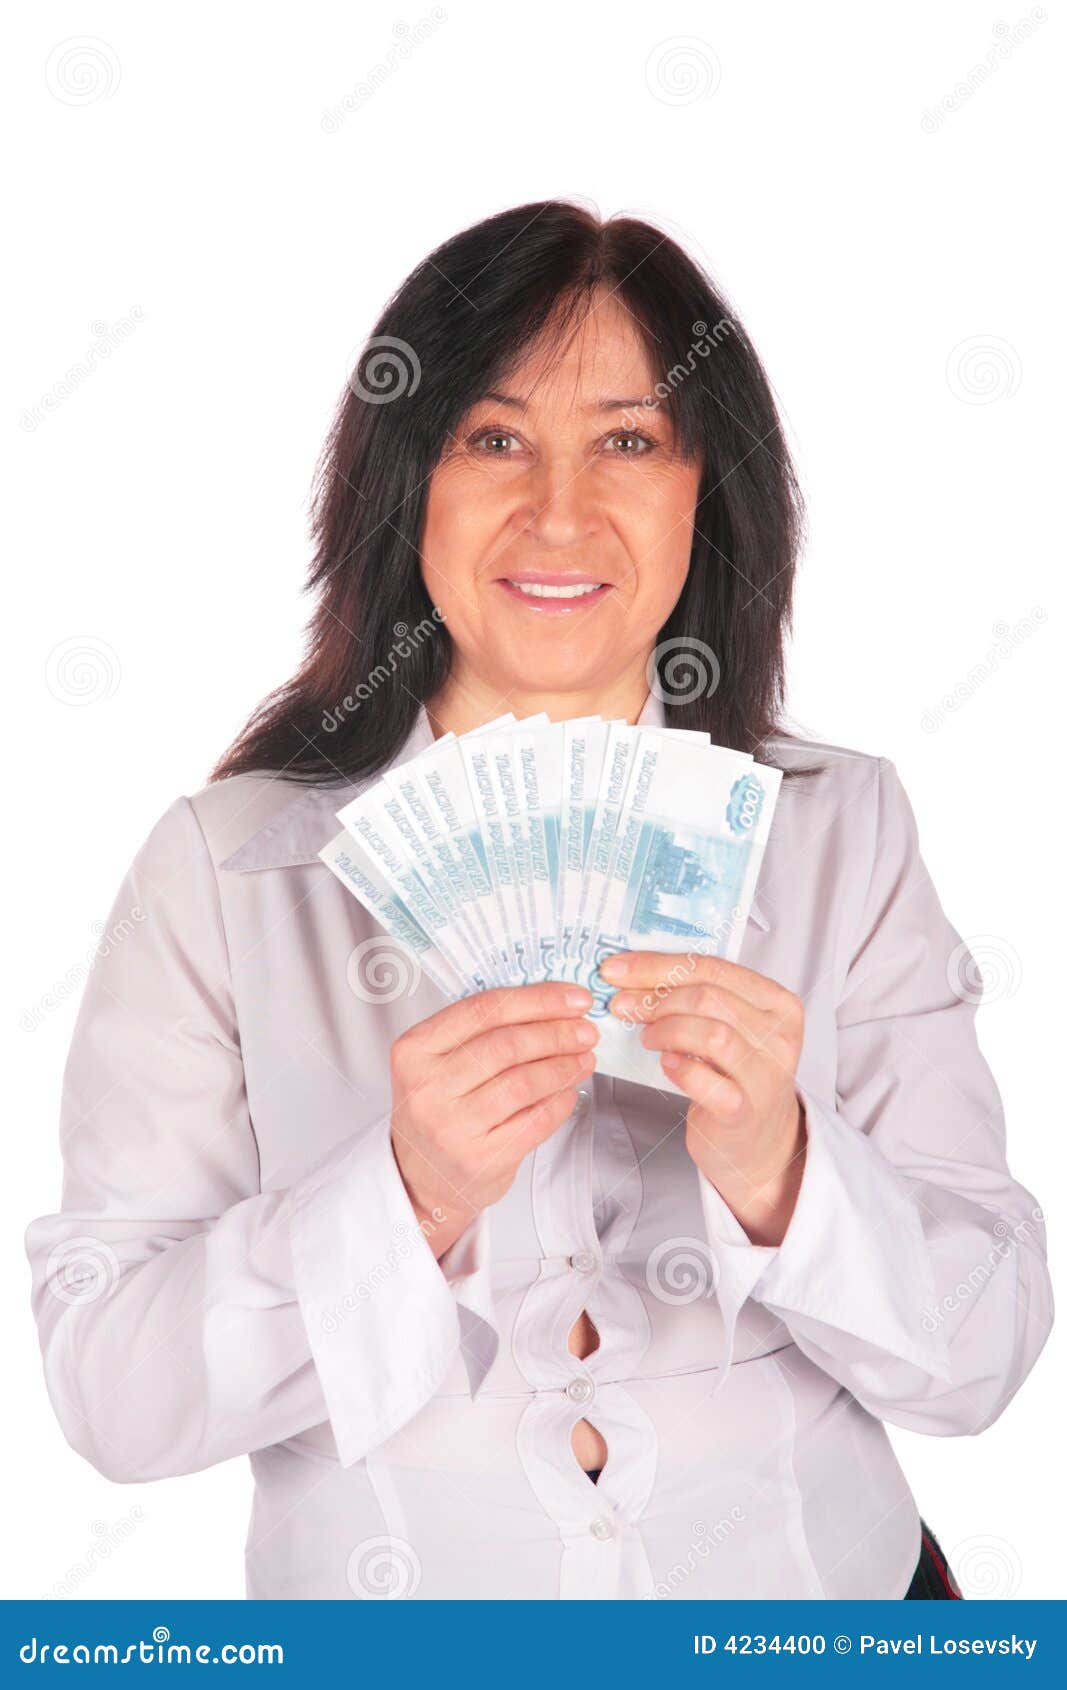 woman holds rubles